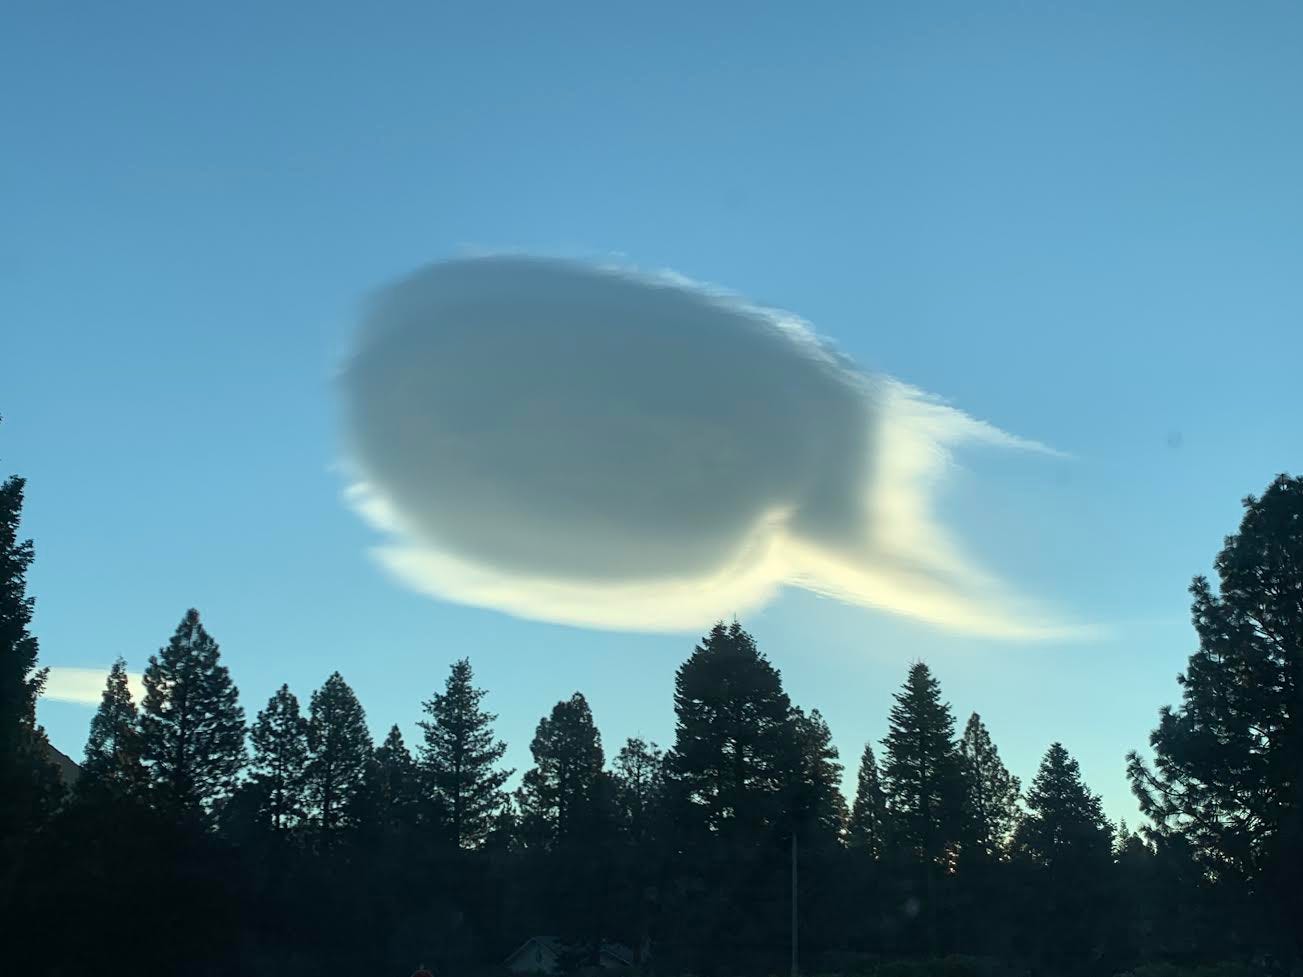 An odd looking lenticular over the city of Mount Shasta in February of 2020.